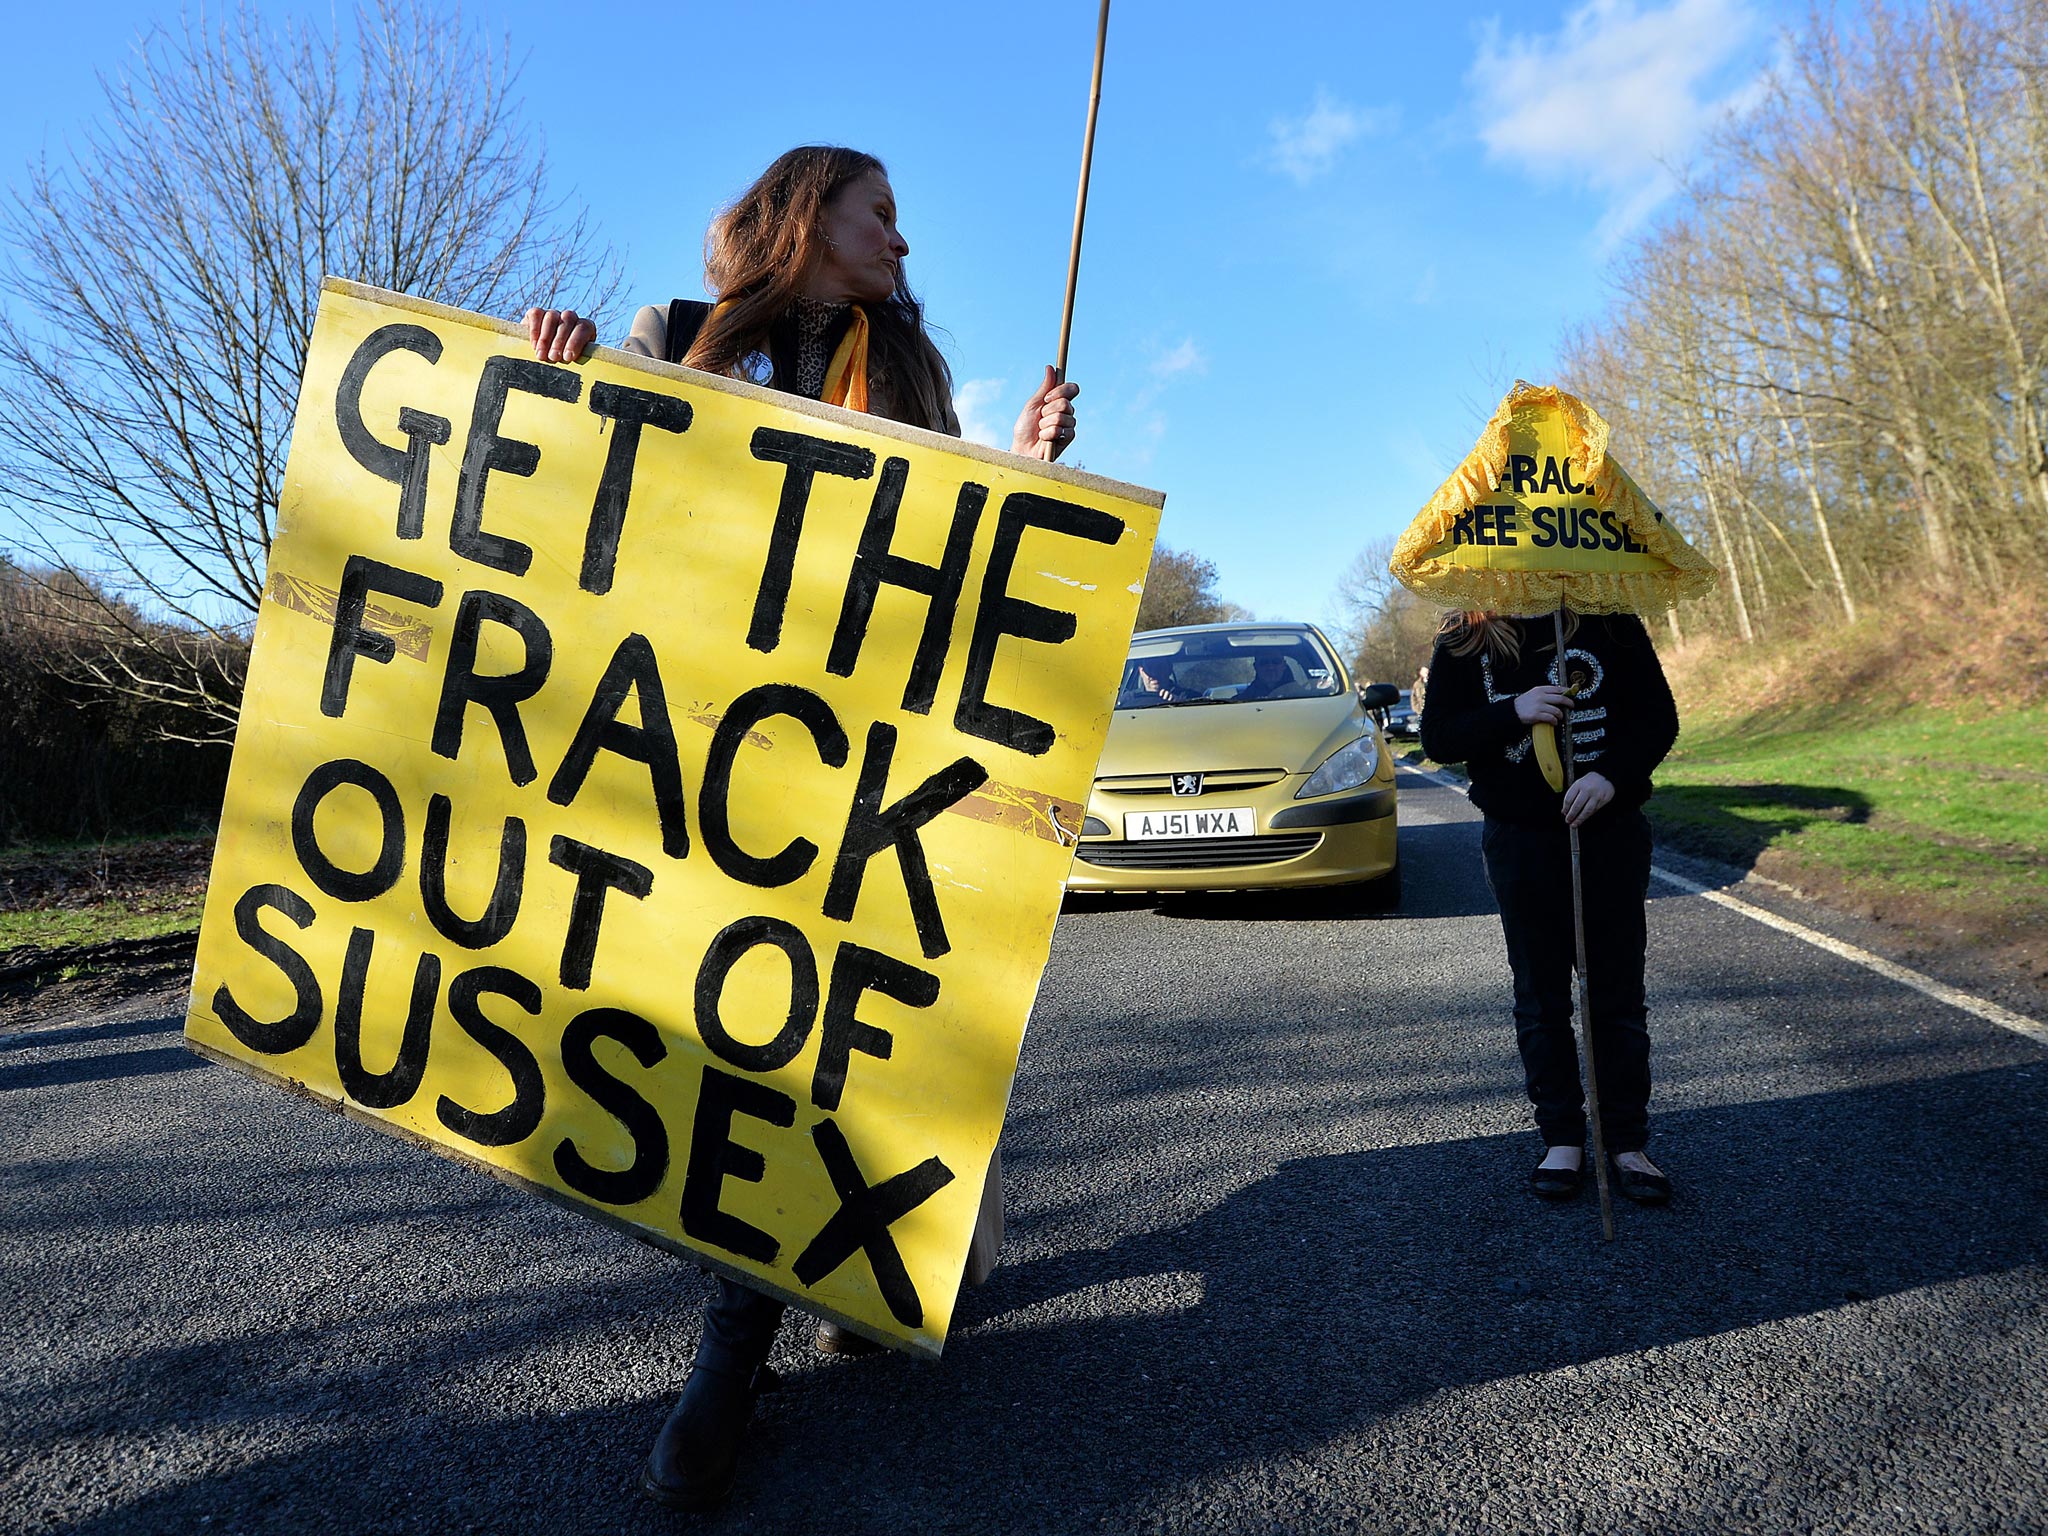 Anti-fracking protesters in Balcombe, West Sussex